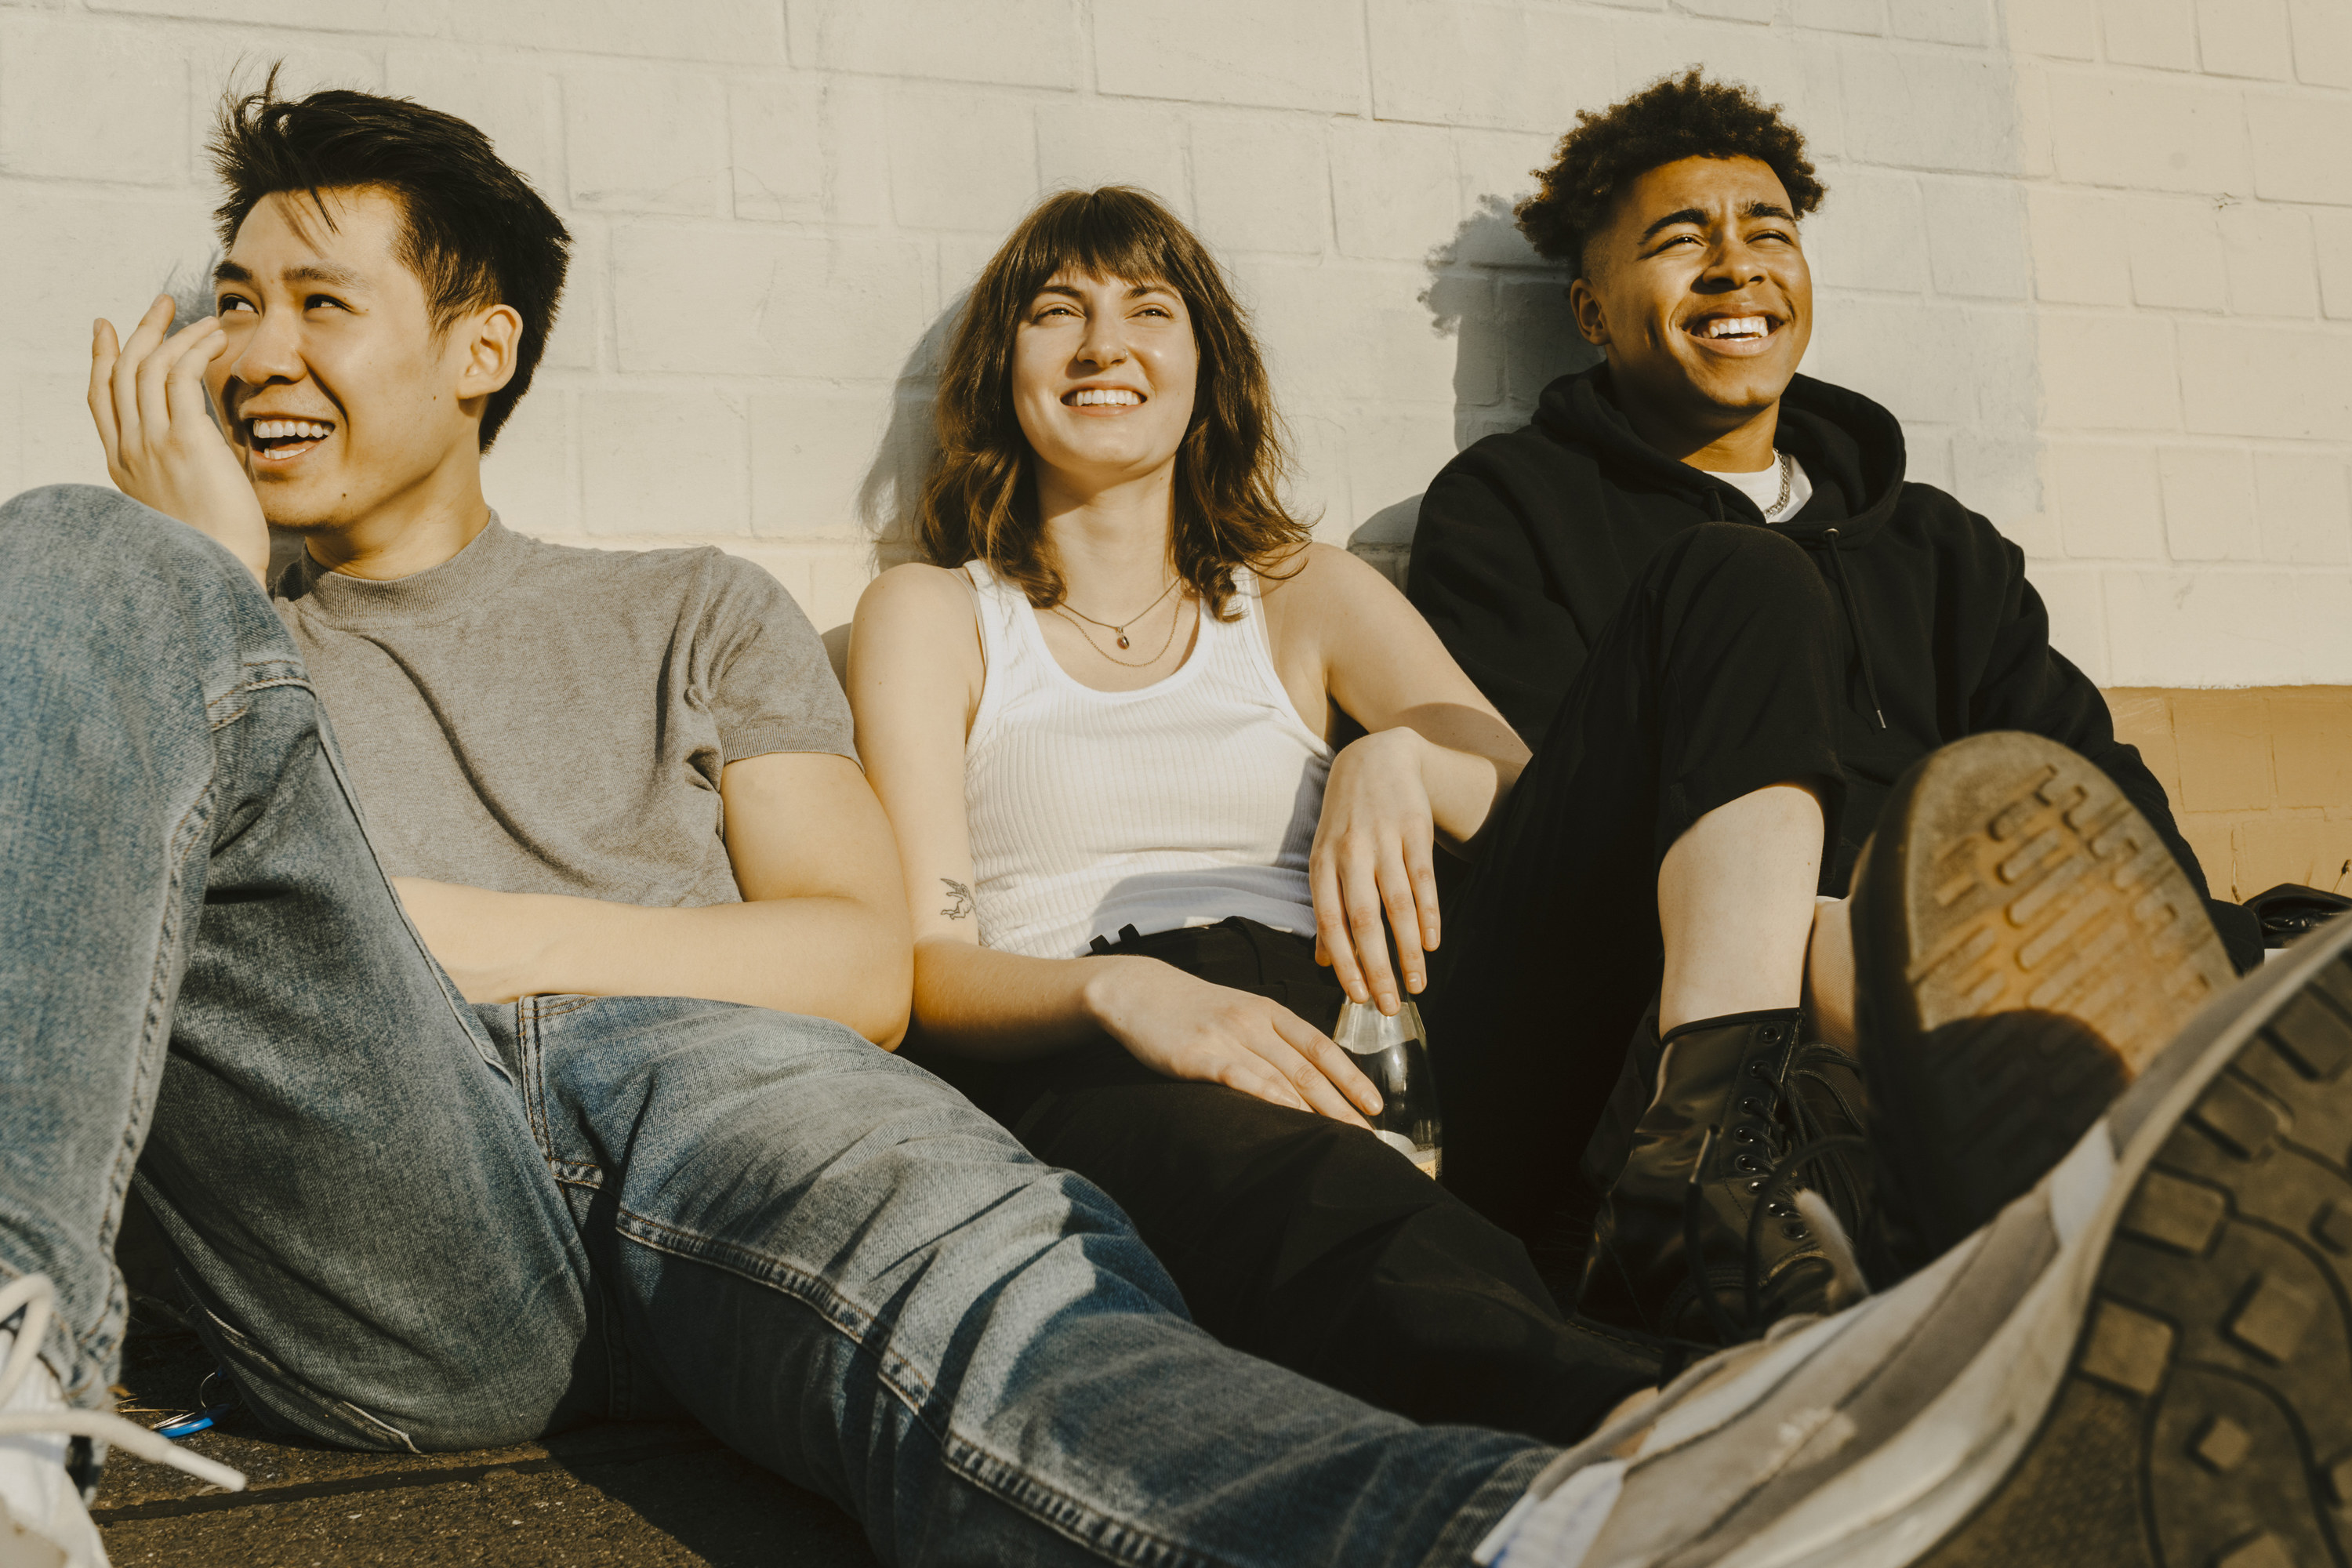 Three teens sitting together on the ground